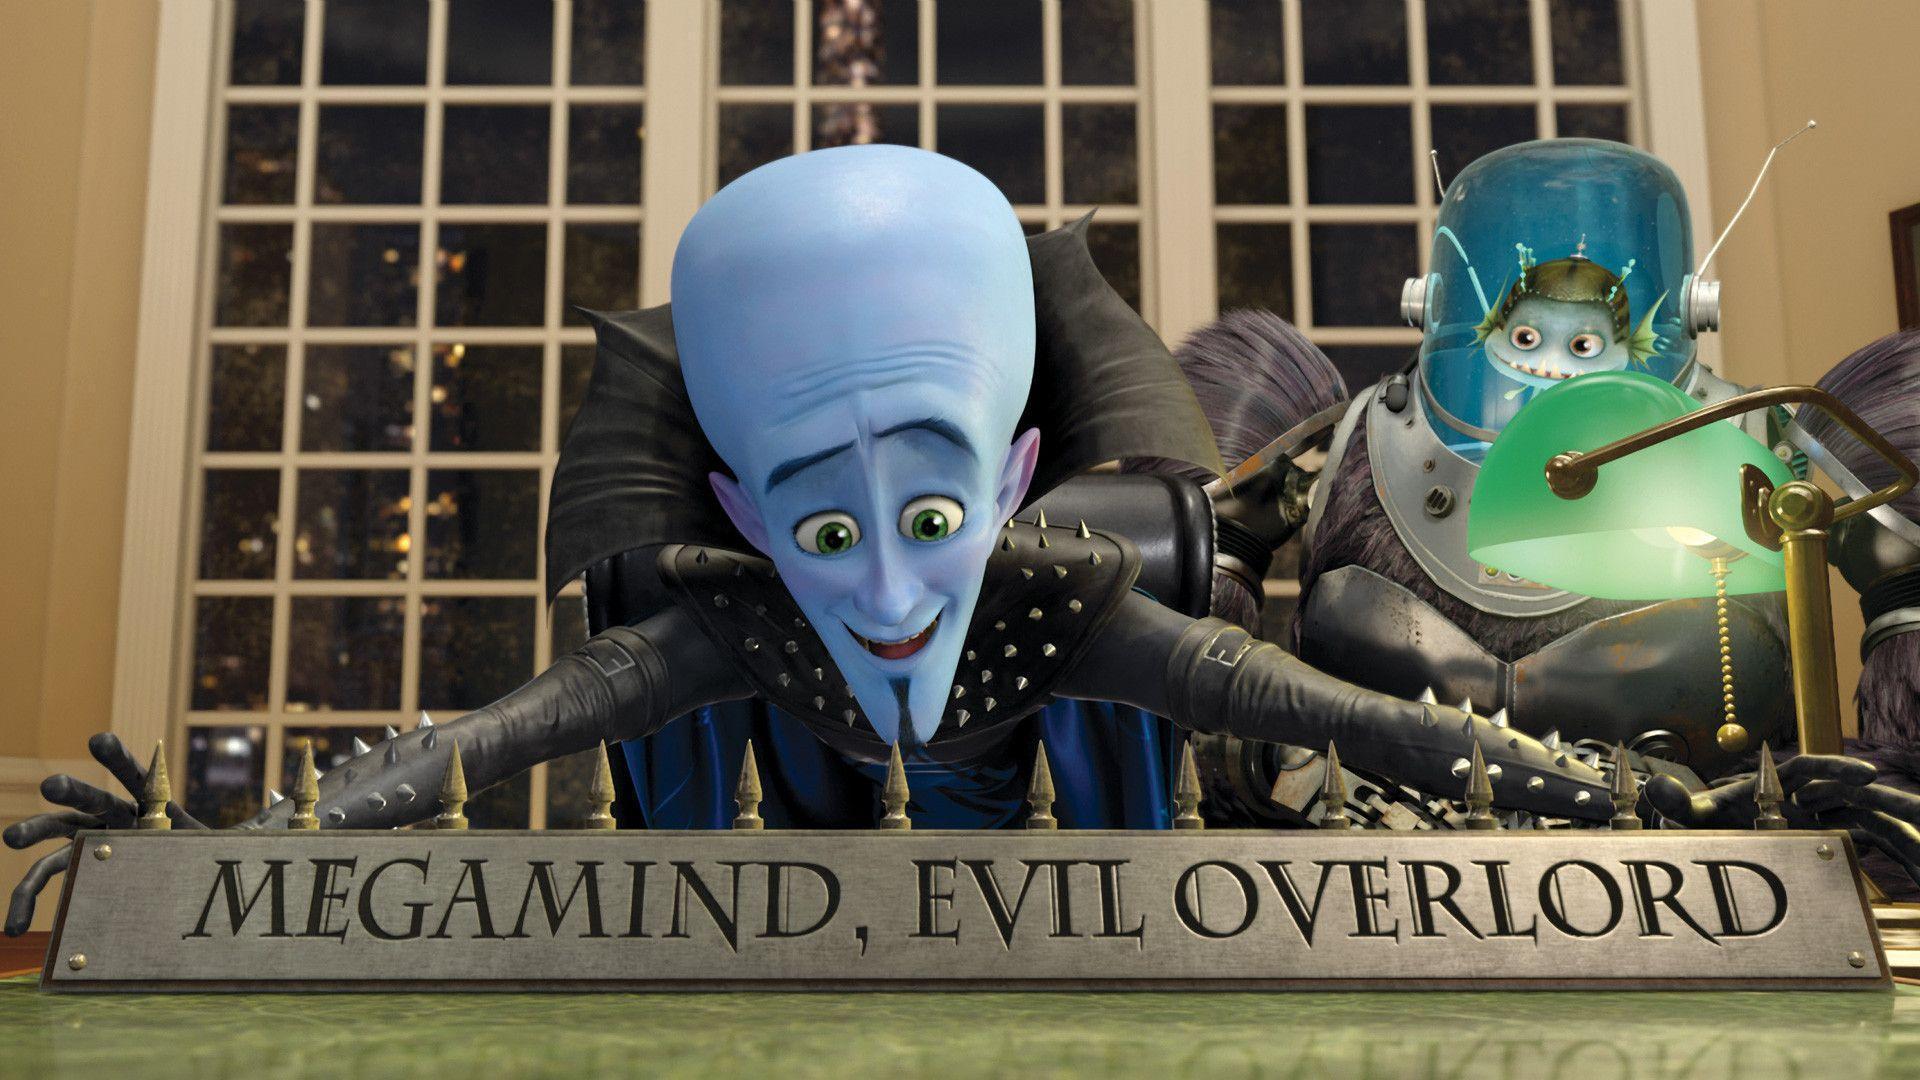 20 Megamind Megamind HD Wallpapers and Backgrounds